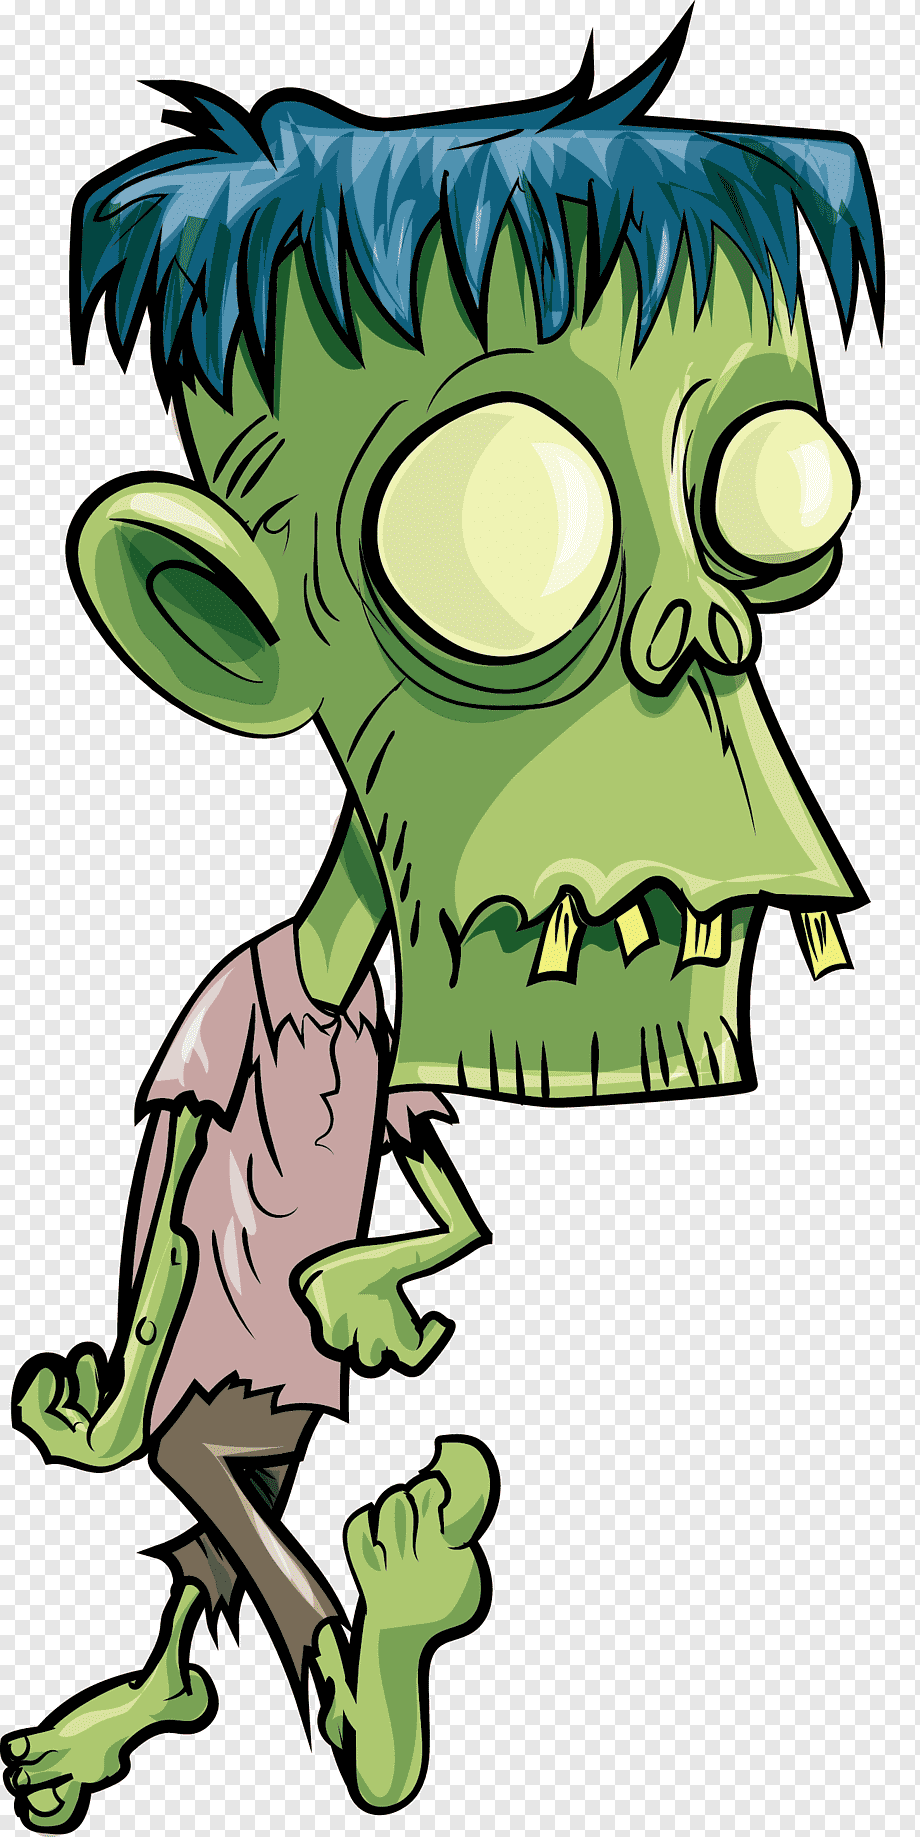 walking zombie png animated Zombie clipart cartoon transparent drawings head zombies background euclidean drawing imgbin draw cute clip green clipground cool characters scary graffiti